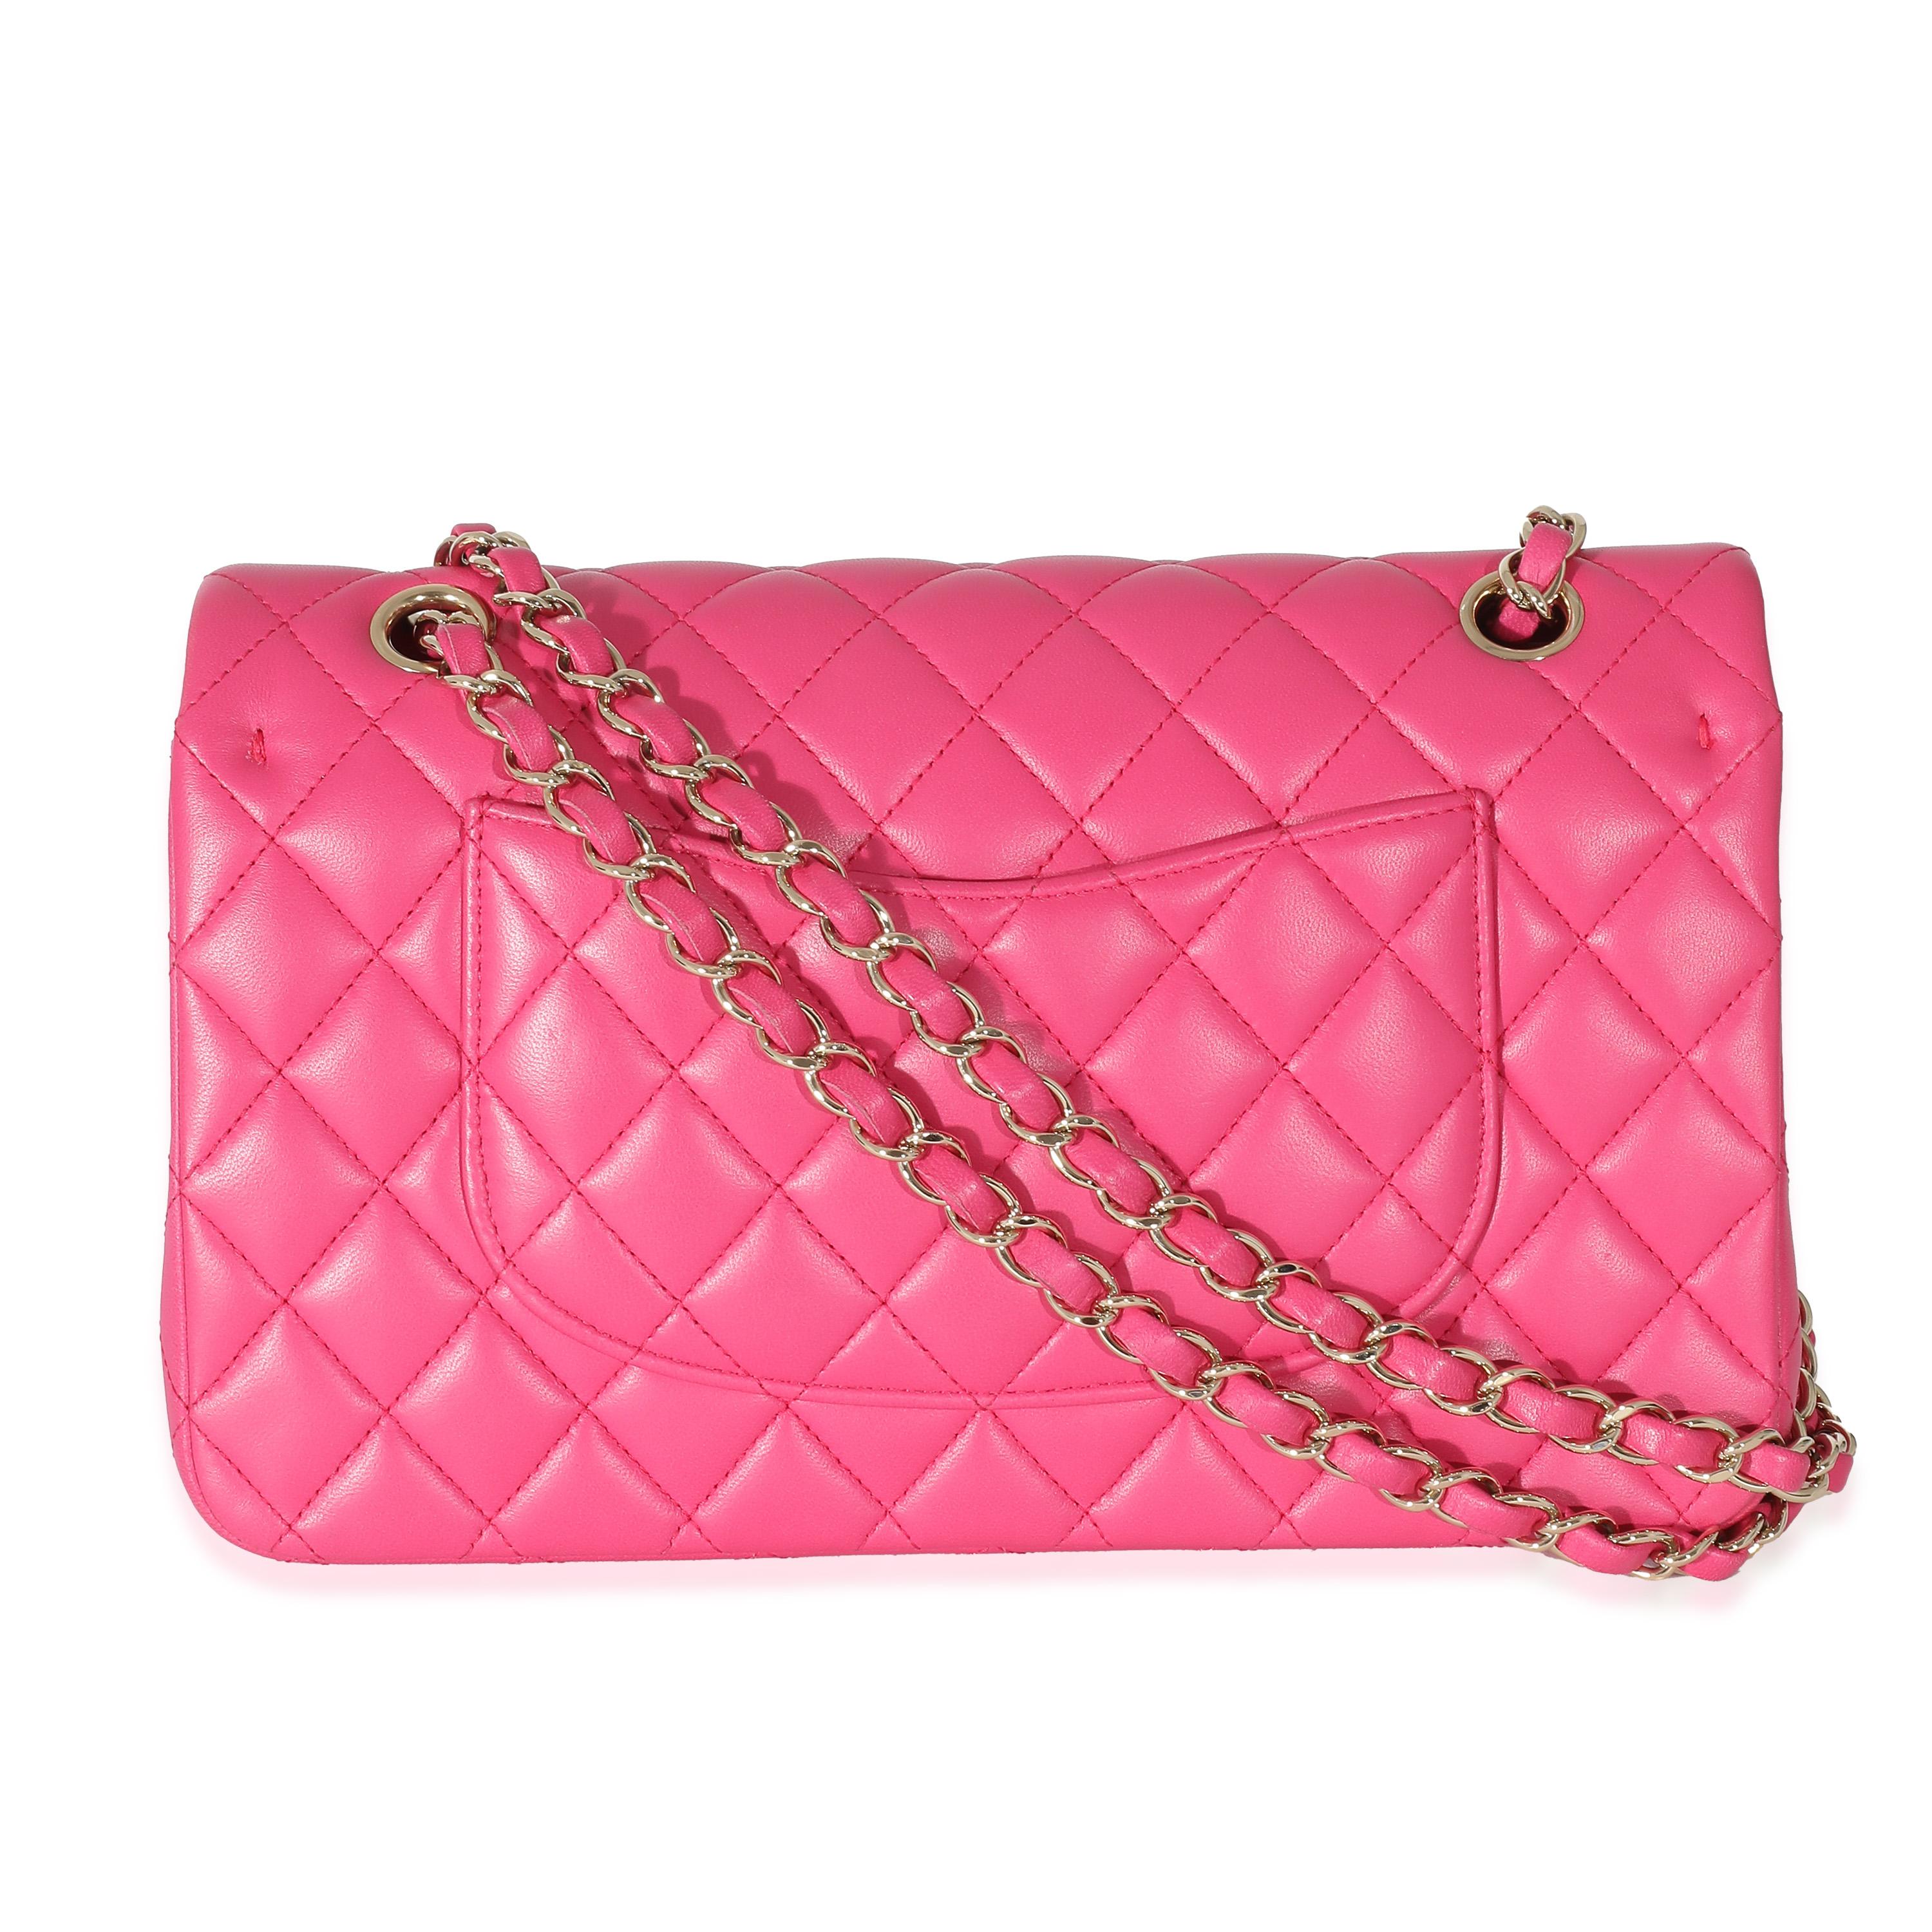 chanel hot pink purse